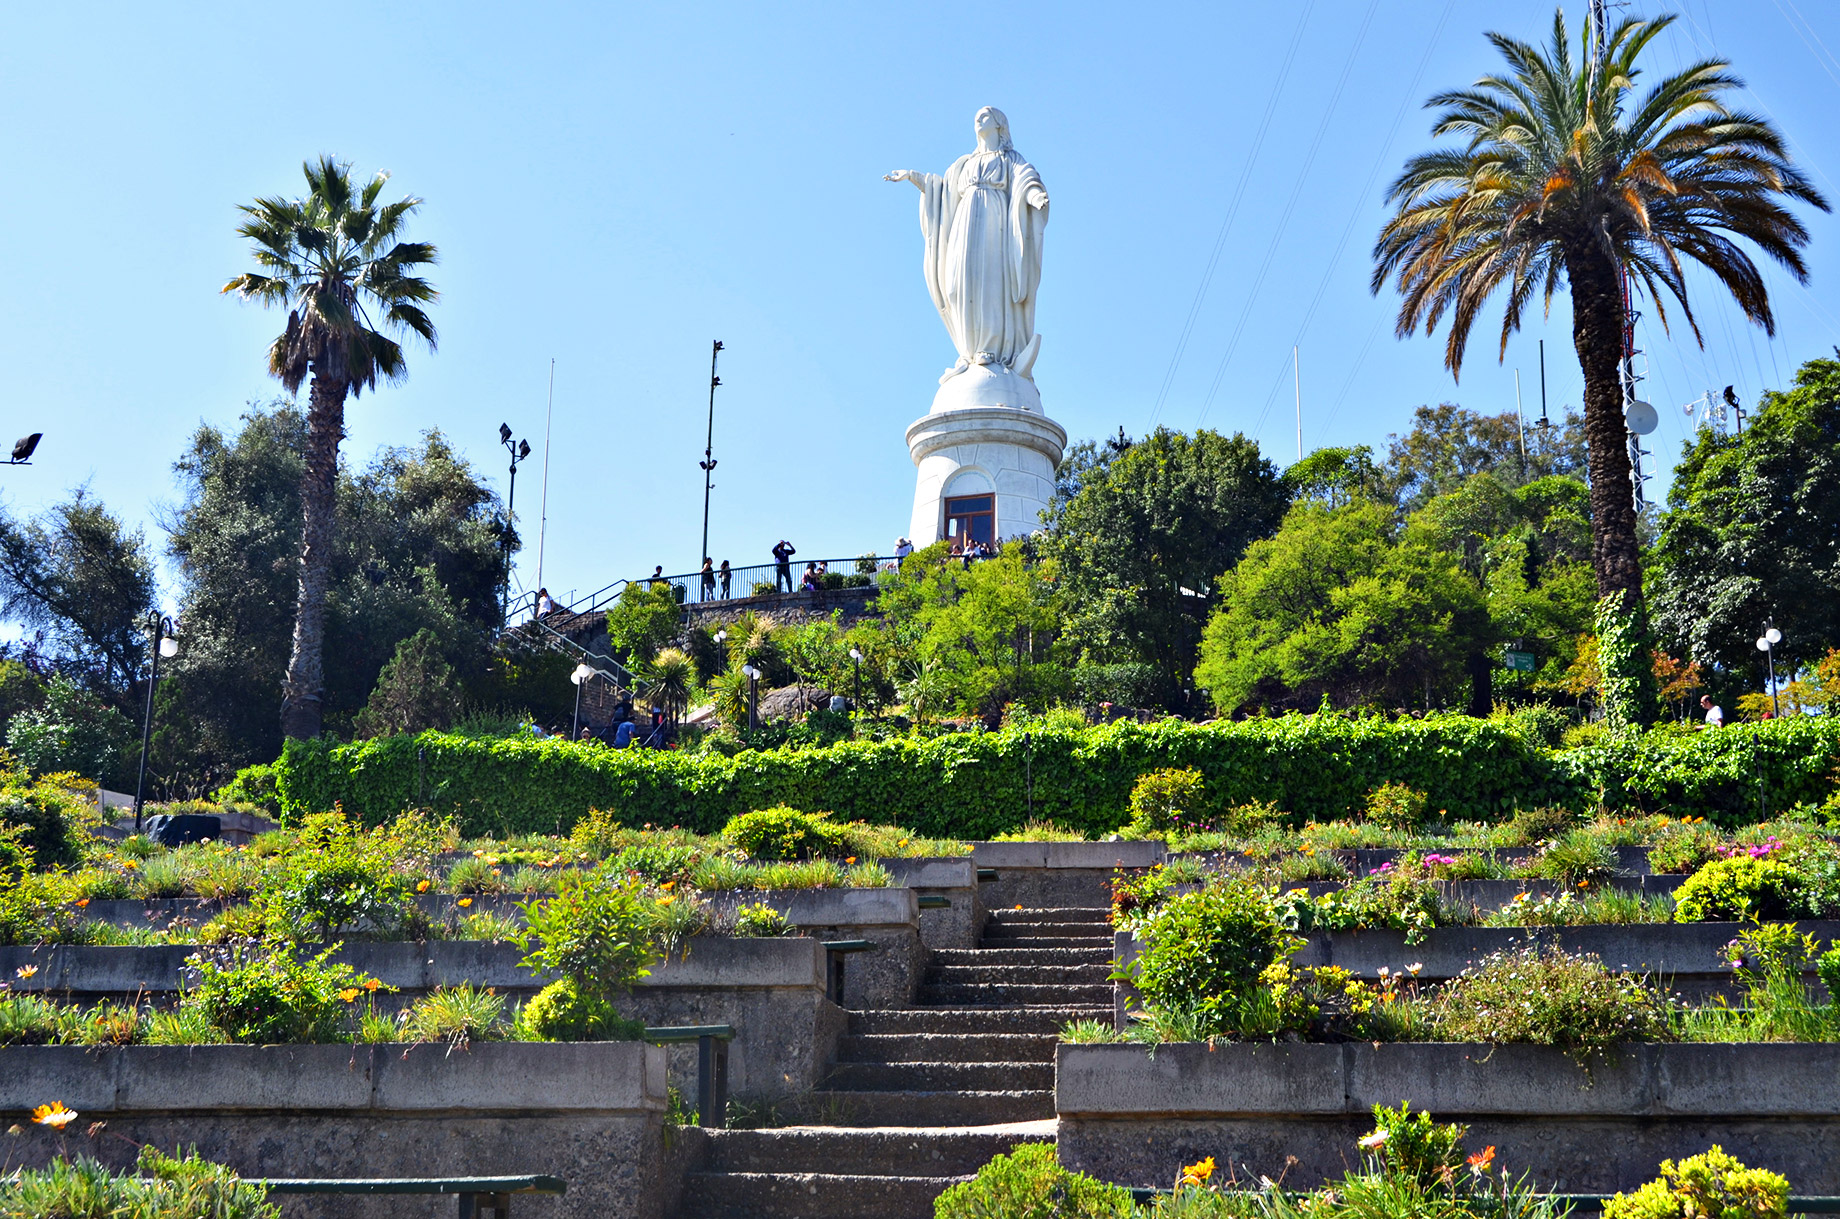 Stairs to the Statue of the Virgin Mary on the top of Cerro San Cristóbal - Santiago, Chile